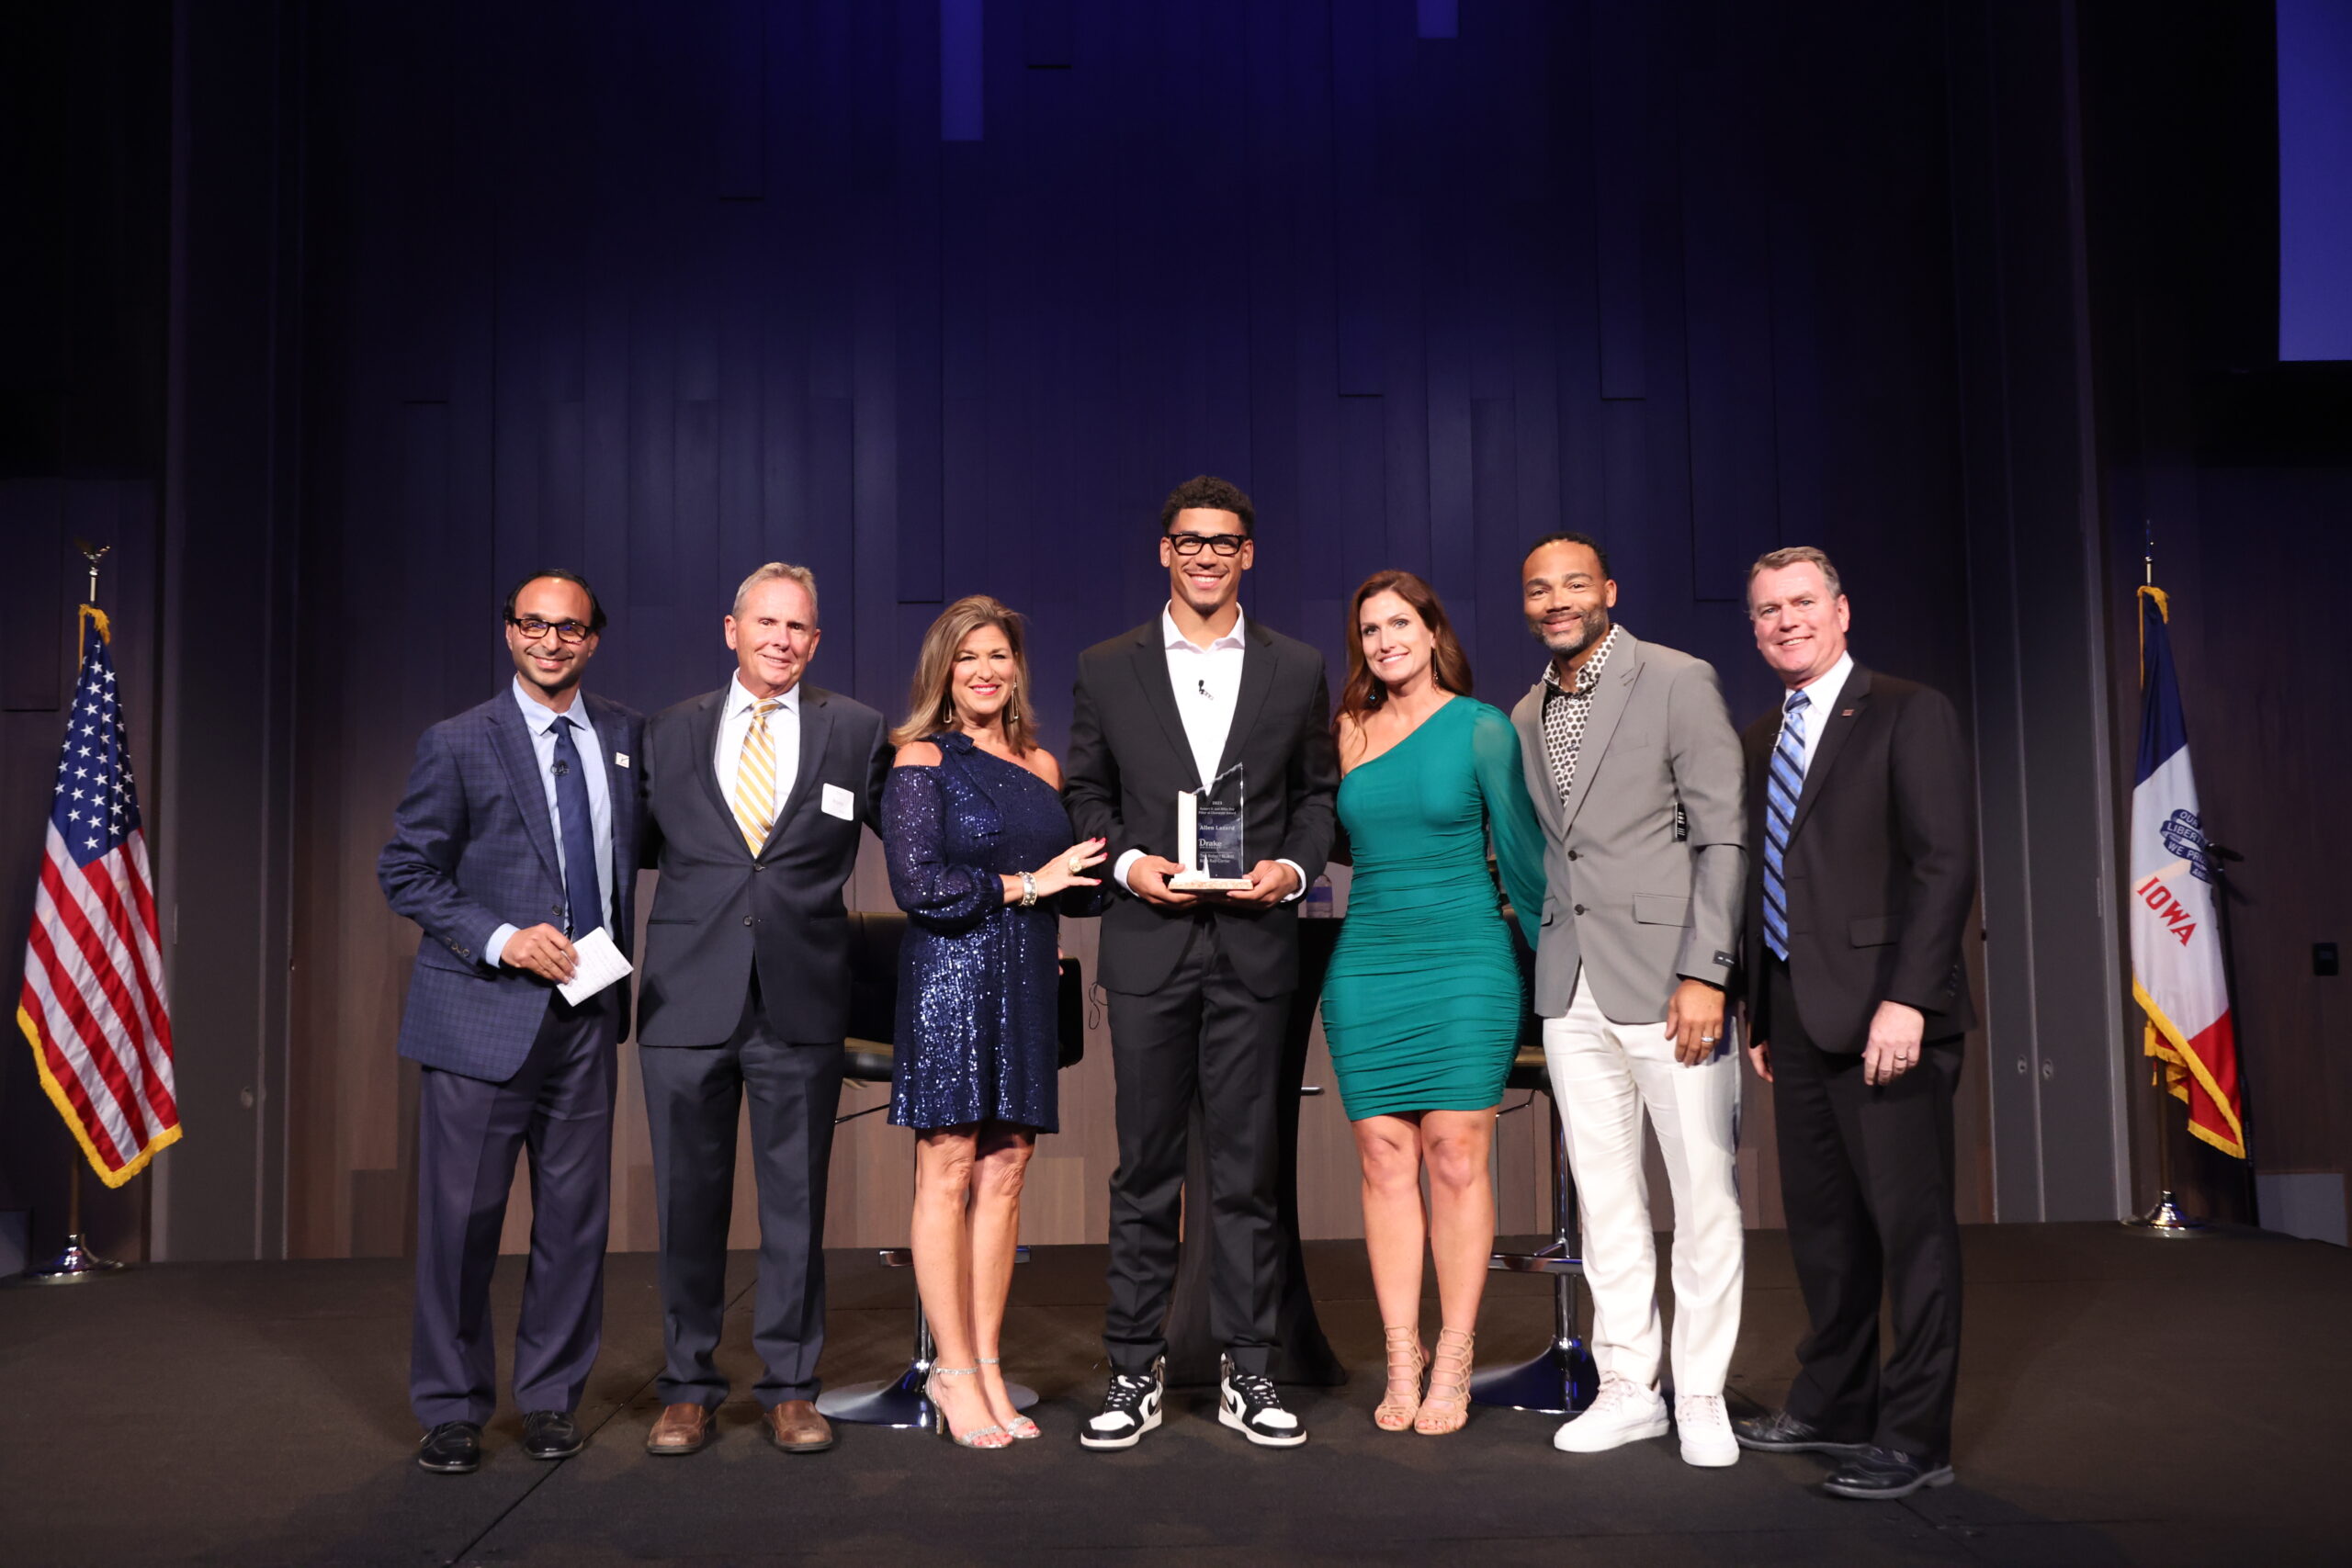 The Ray Center Honors Allen Lazard with the Robert D. and Billie Ray Pillar of Character Award